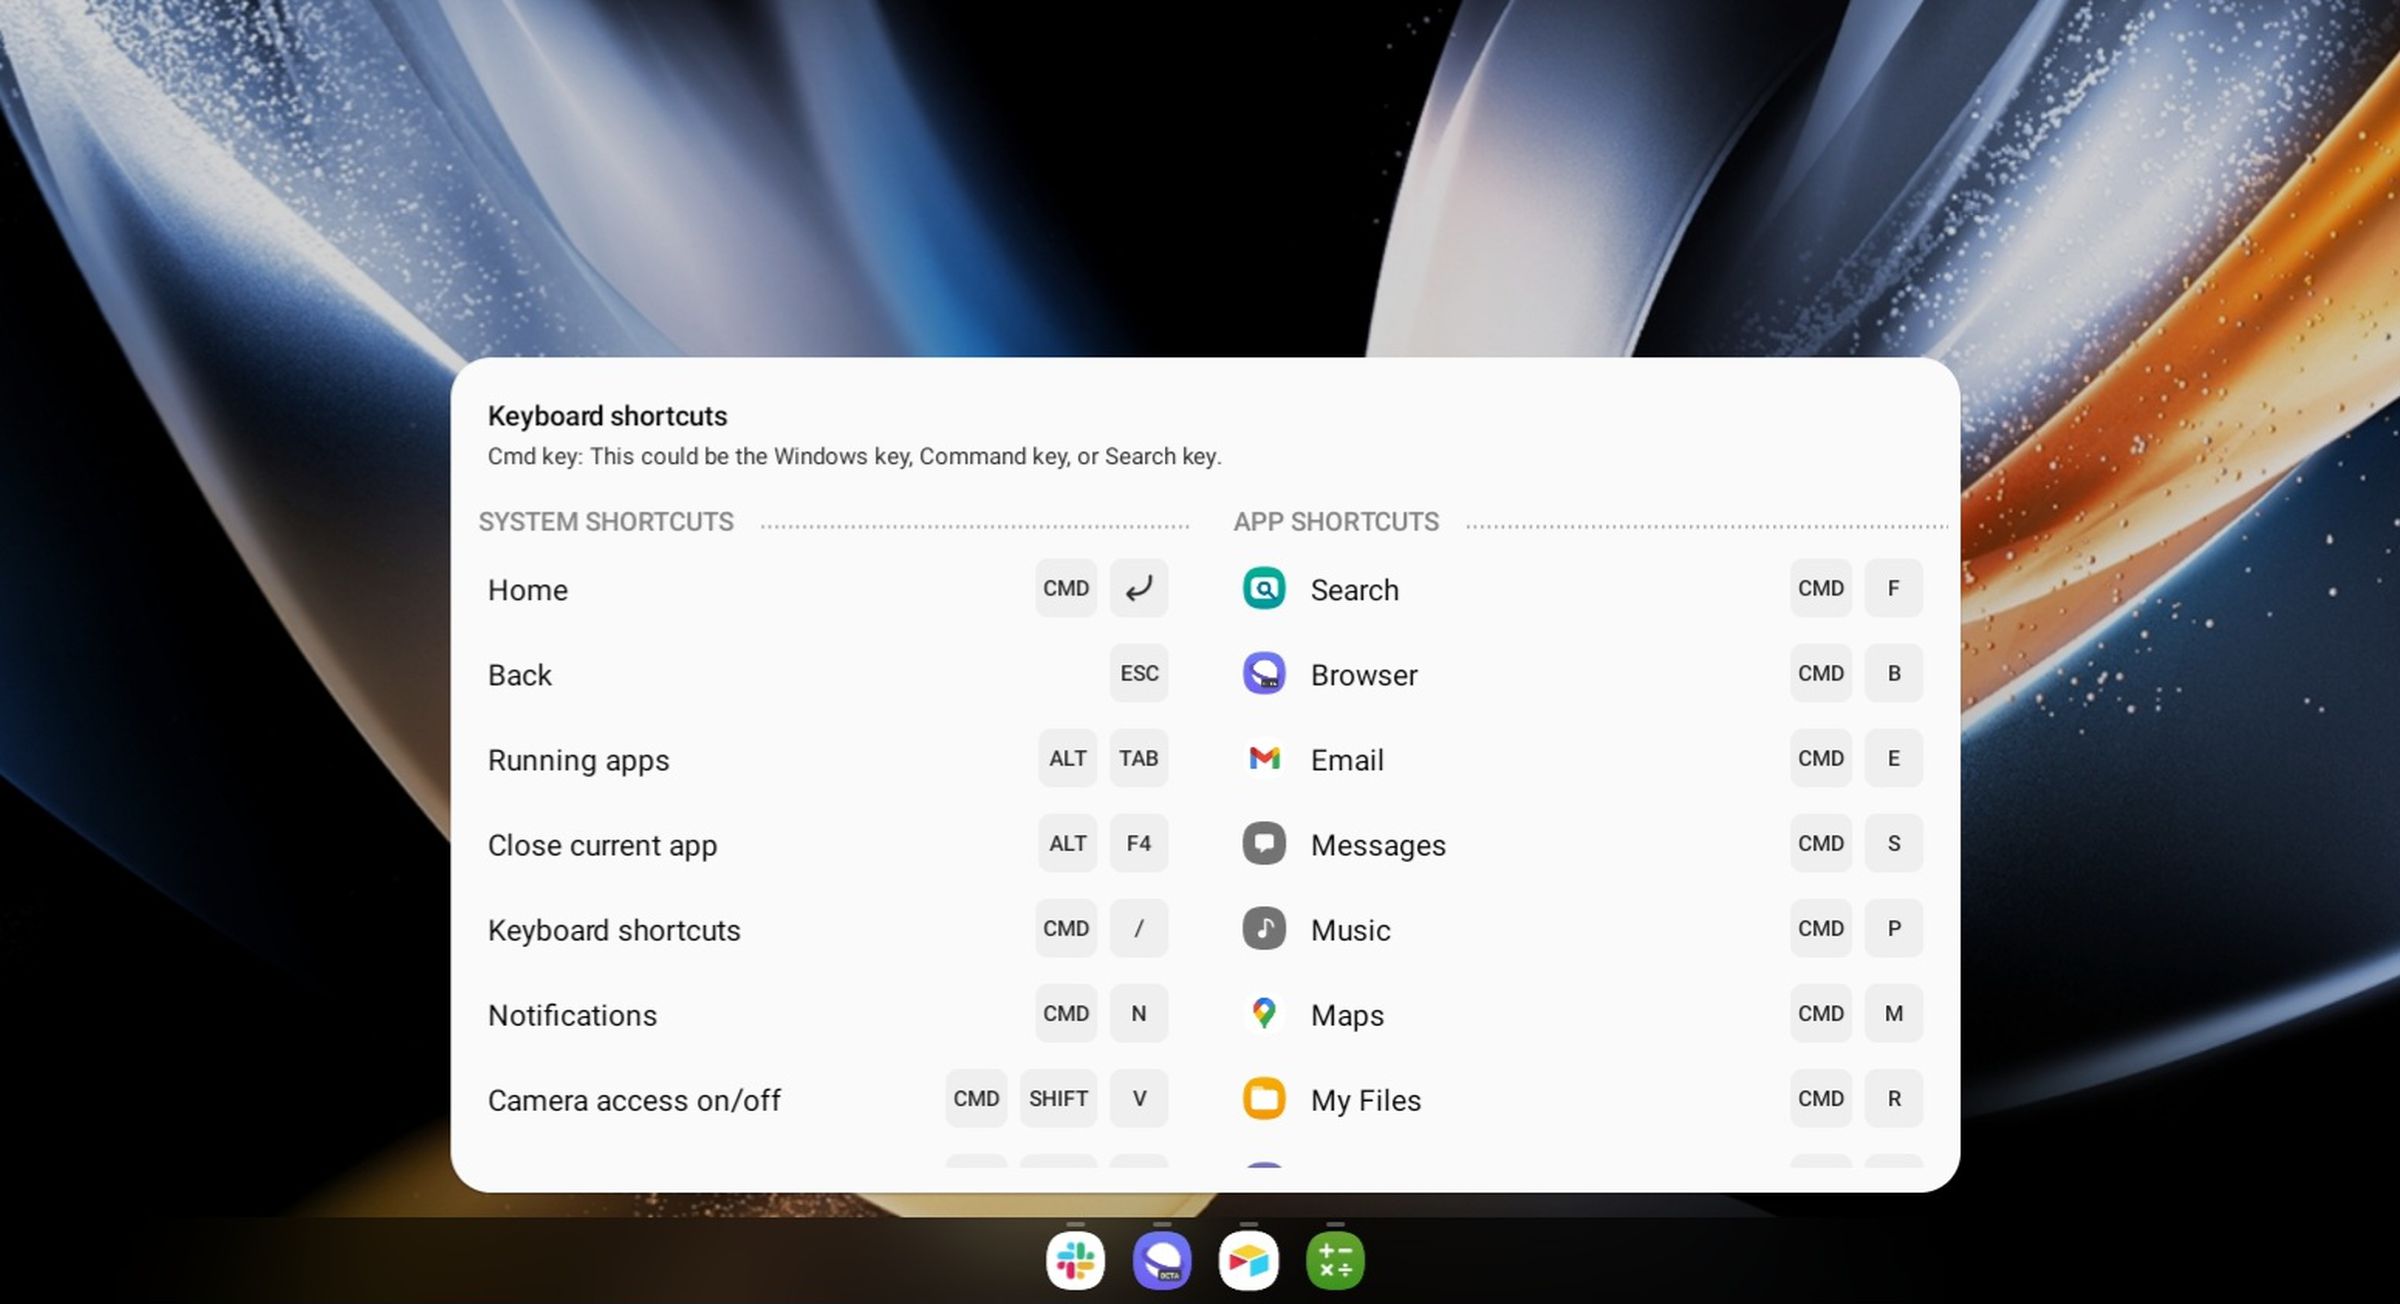 Dex now offers a surprisingly long list of supported keyboard shortcuts to make navigating feel even more like a traditional desktop operating system.